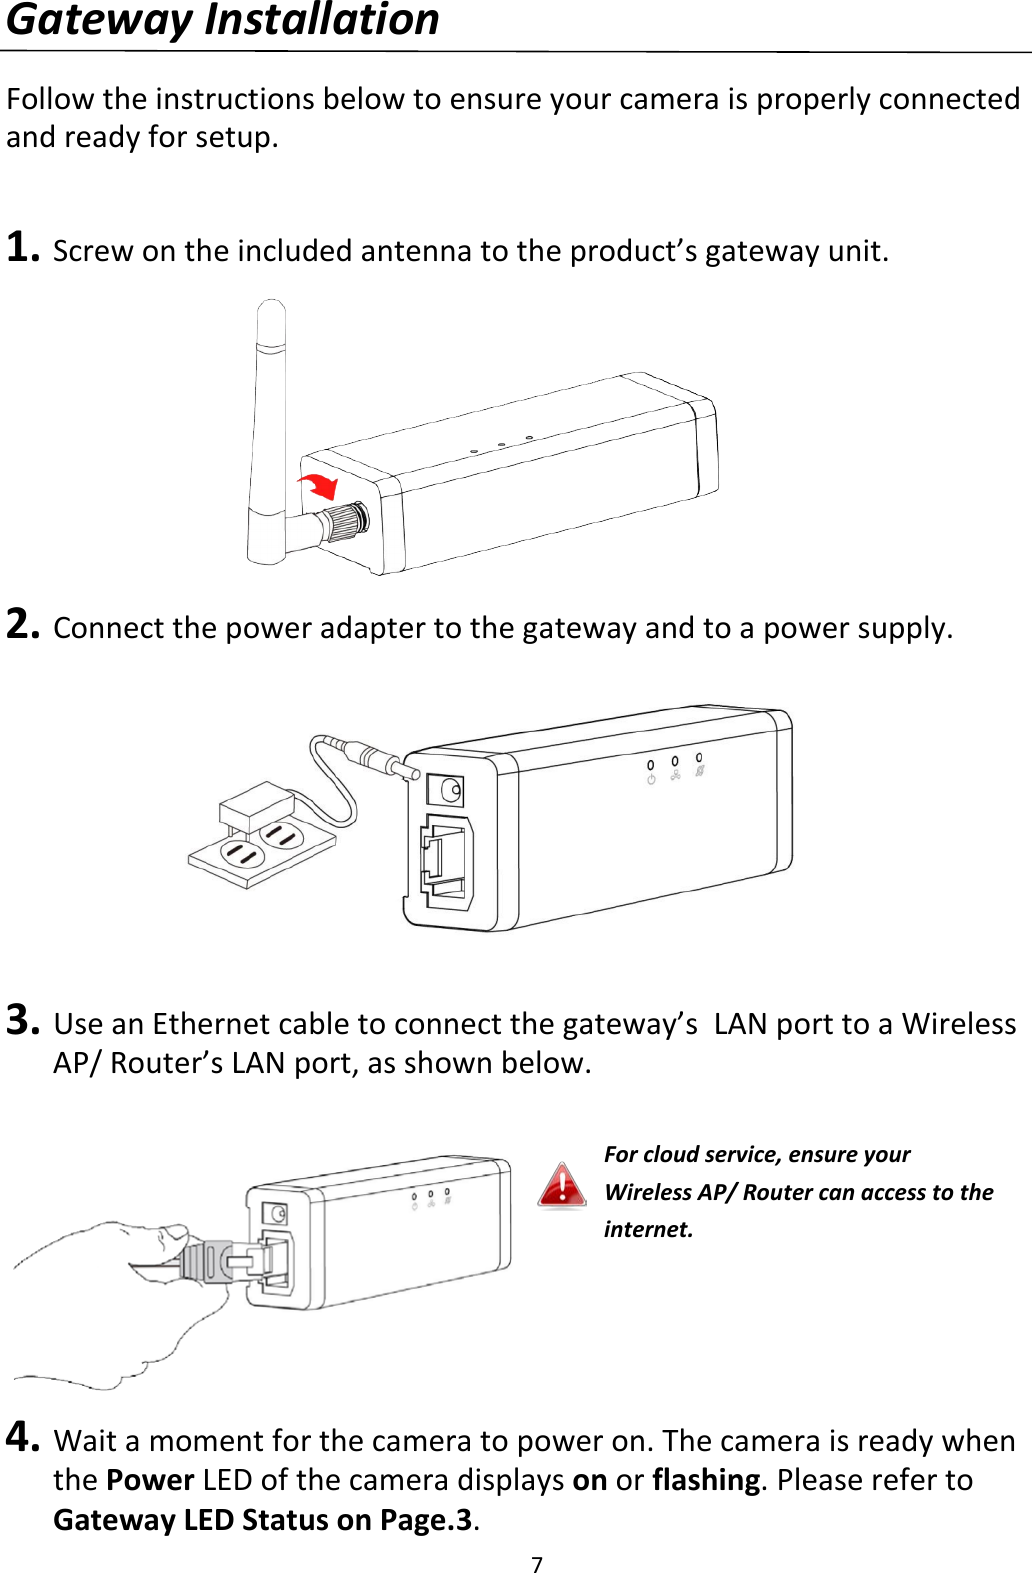 7  Gateway Installation  Follow the instructions below to ensure your camera is properly connected and ready for setup.   1. Screw on the included antenna to the product’s gateway unit.        2. Connect the power adapter to the gateway and to a power supply.          3. Use an Ethernet cable to connect the gateway’s  LAN port to a Wireless AP/ Router’s LAN port, as shown below.      4. Wait a moment for the camera to power on. The camera is ready when the Power LED of the camera displays on or flashing. Please refer to Gateway LED Status on Page.3. For cloud service, ensure your Wireless AP/ Router can access to the internet. 